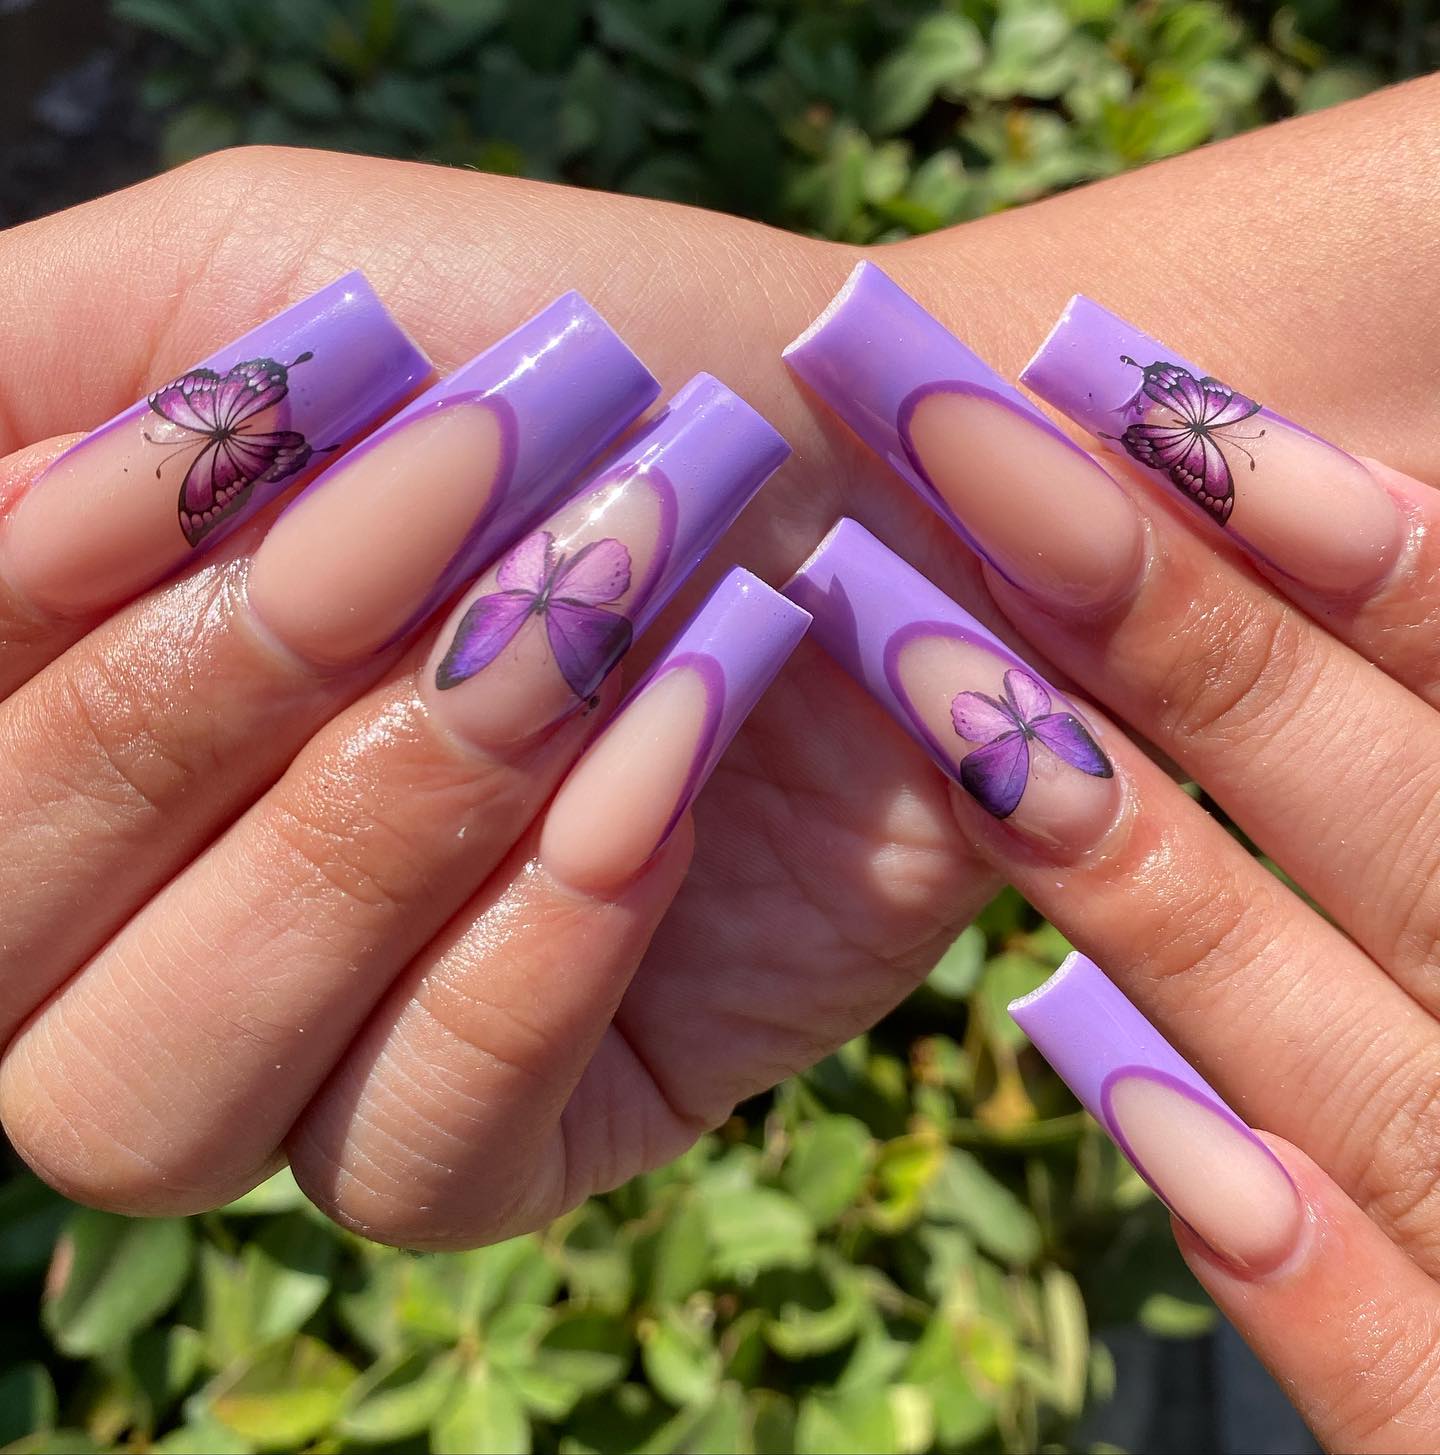 How cute are these purple butterfly nails? Wearing a purple color like the one above matches with butterflies very well.